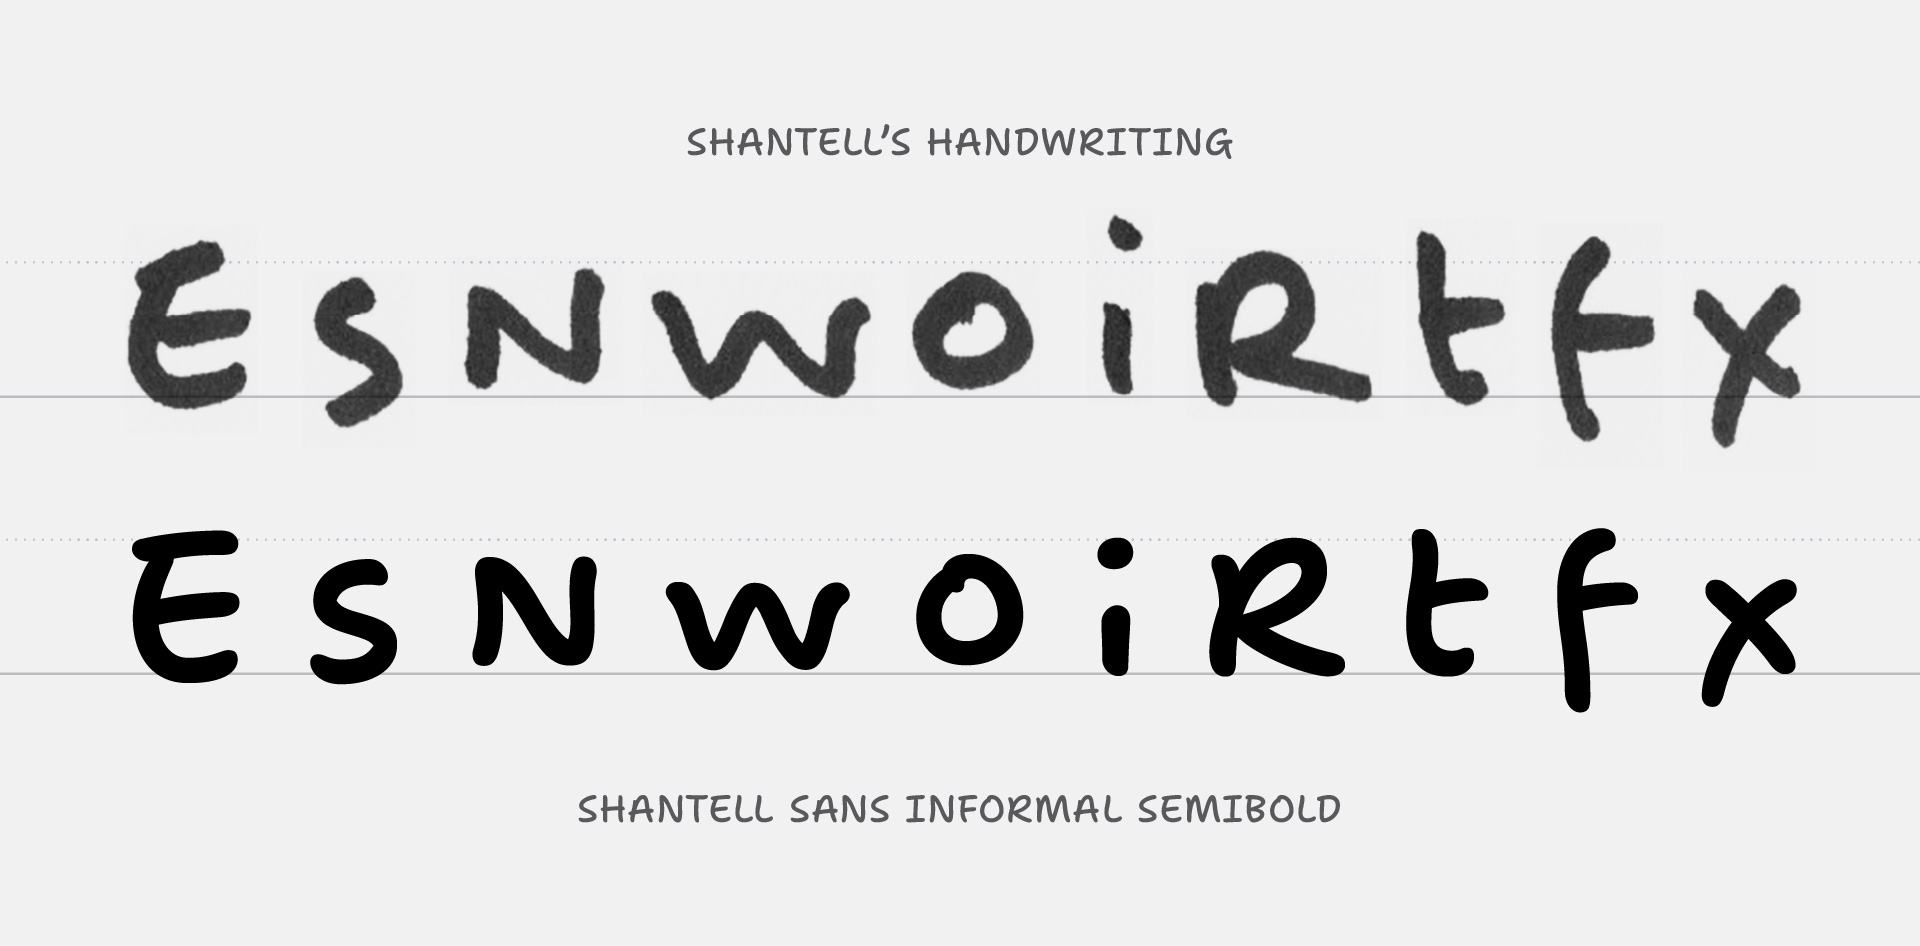 Key letters of Shantell’s handwriting compared to Shantell Sans Informal SemiBold